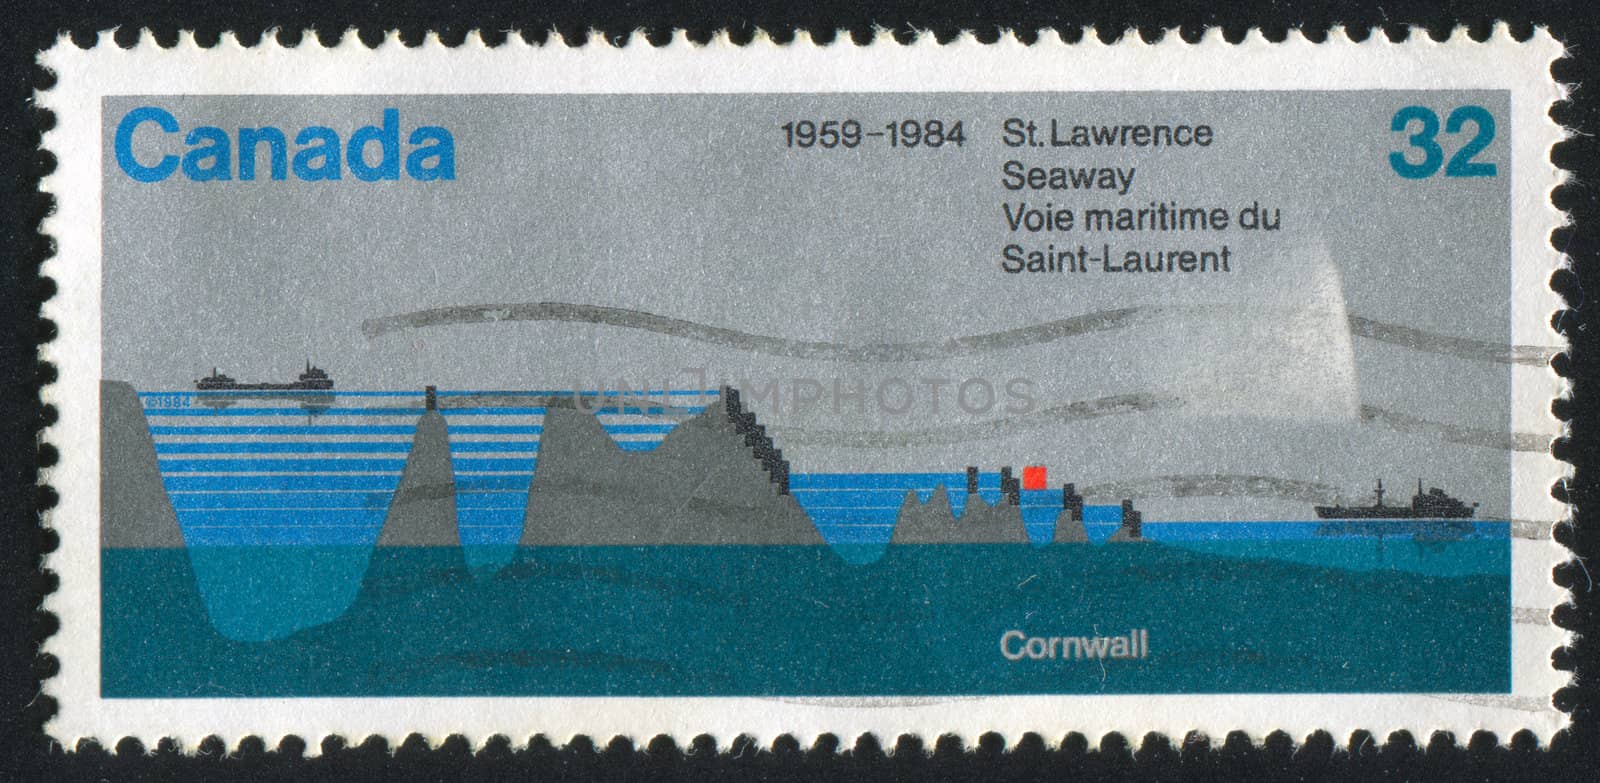 CANADA - CIRCA 1984: stamp printed by Canada, shows St. Lawrence Seaway, circa 1984